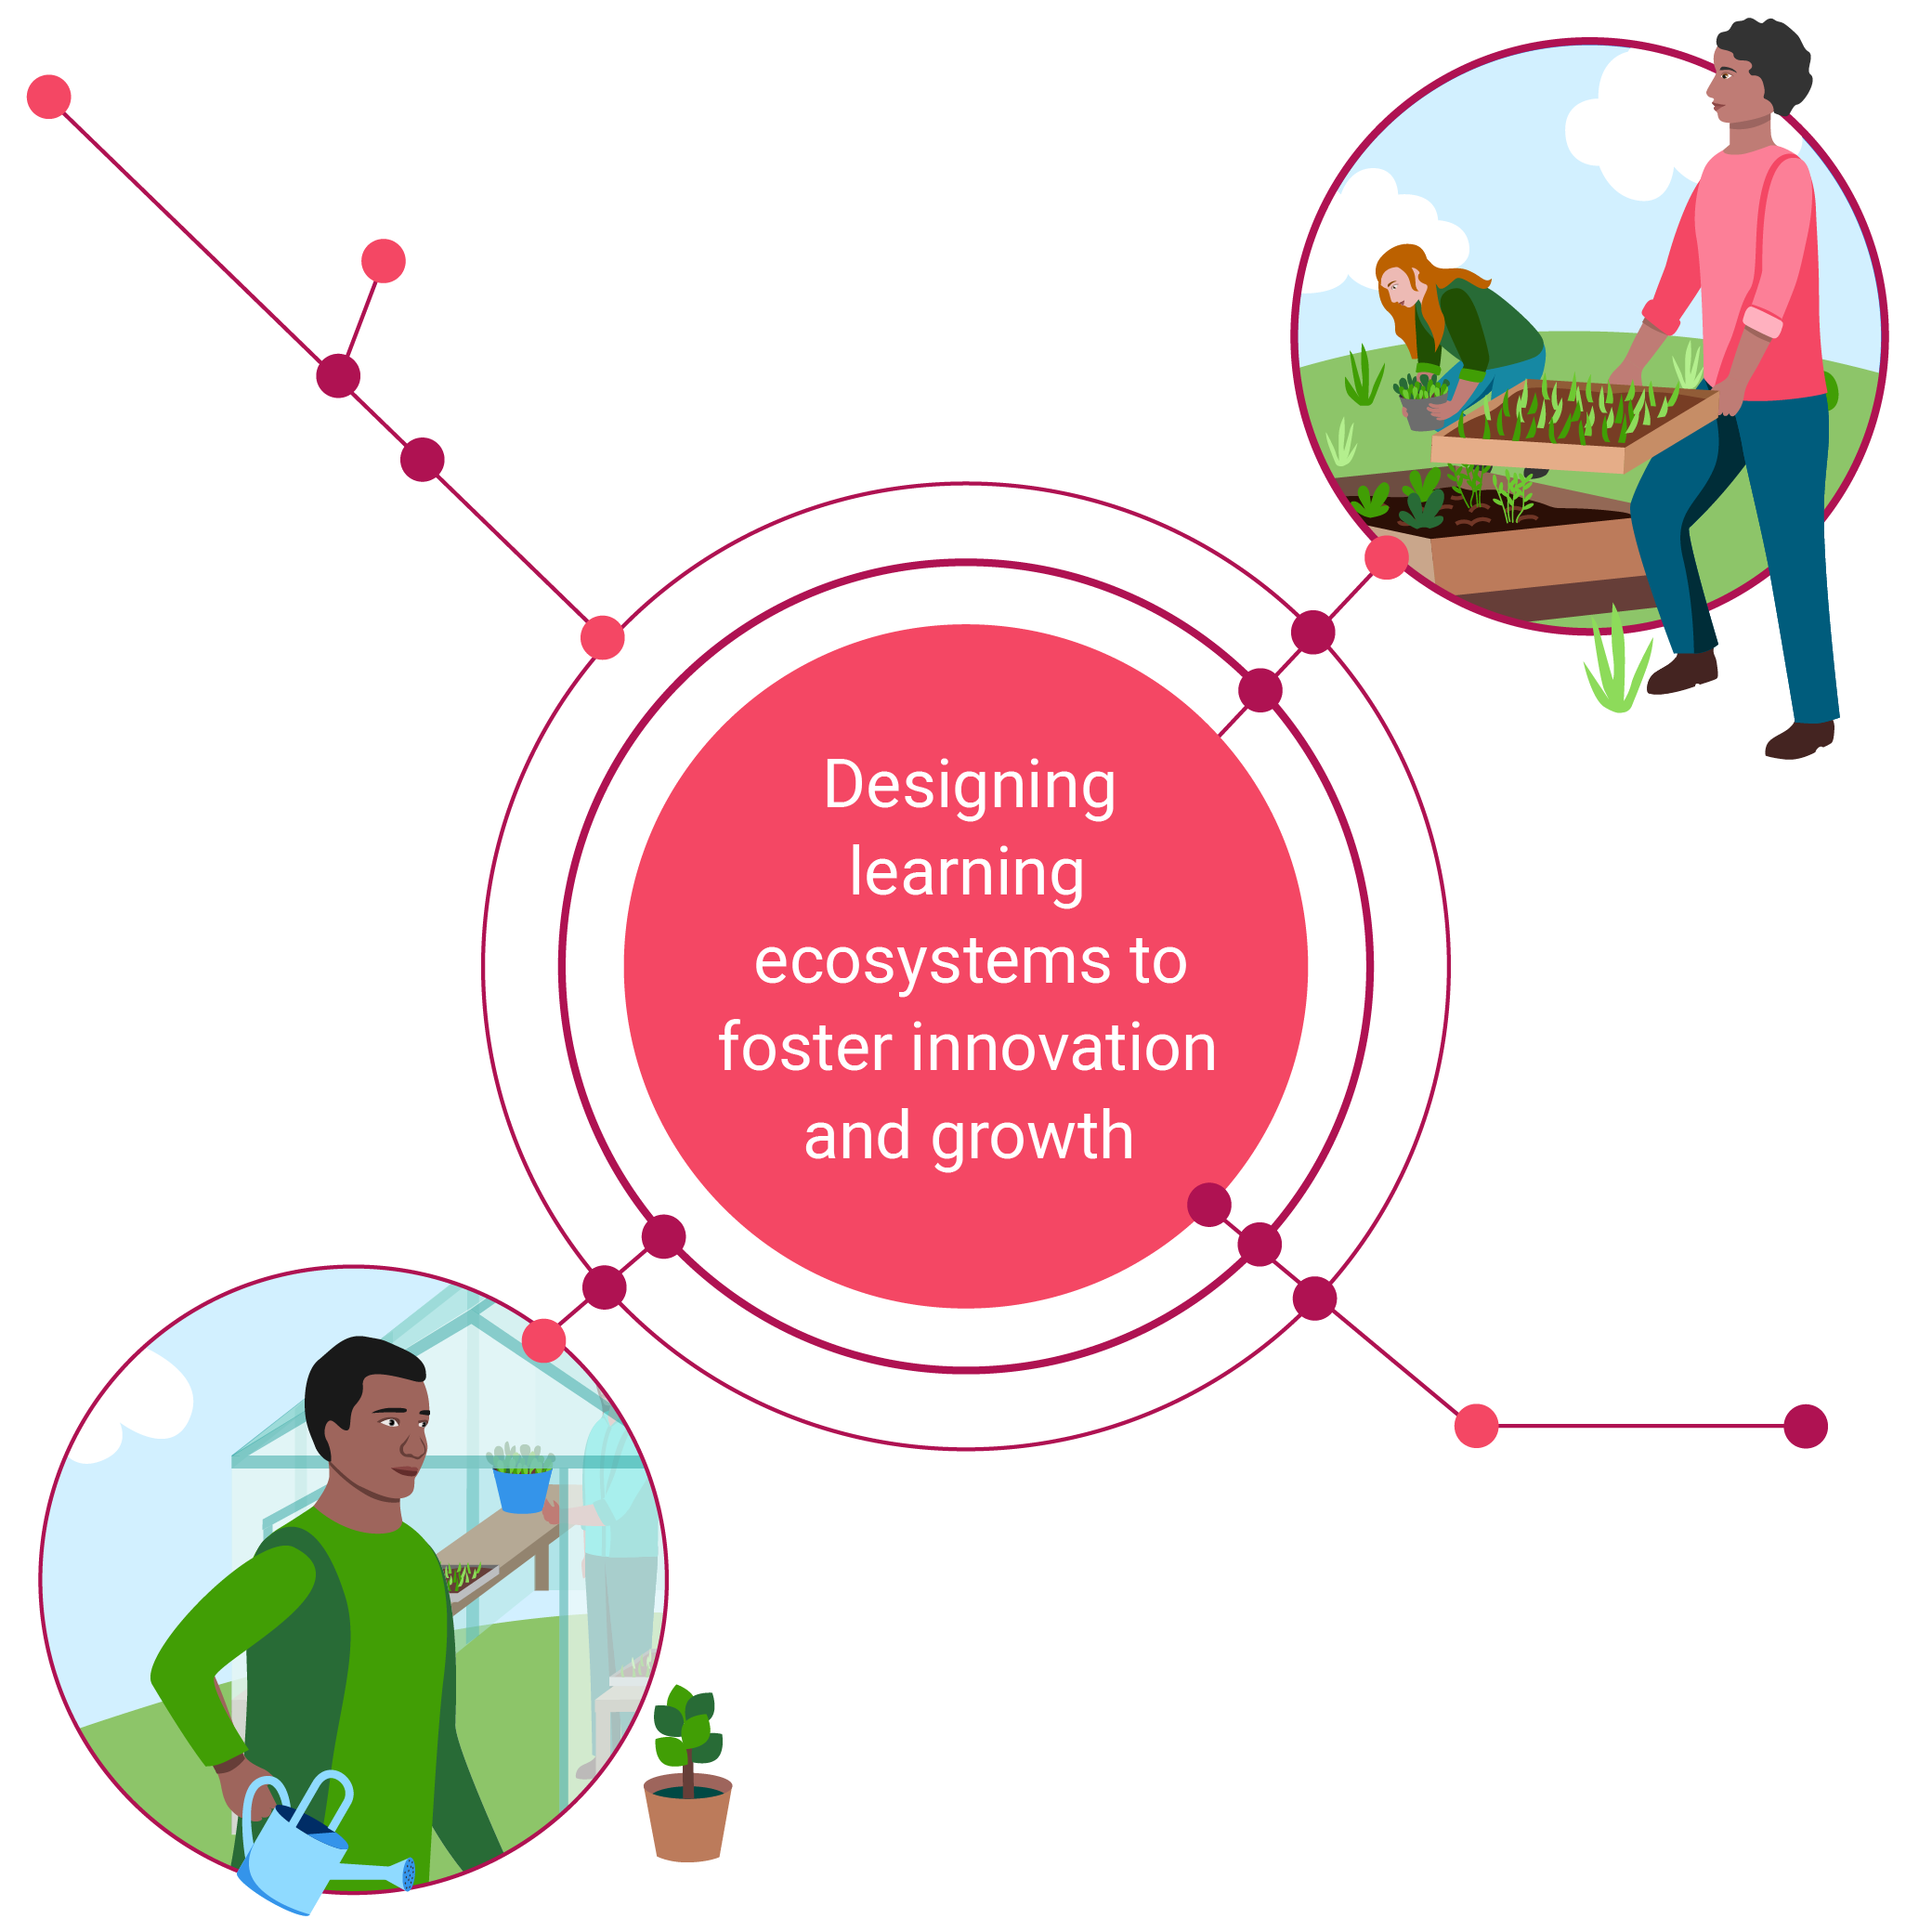 4Designing learning ecosystems to foster innovation and growth